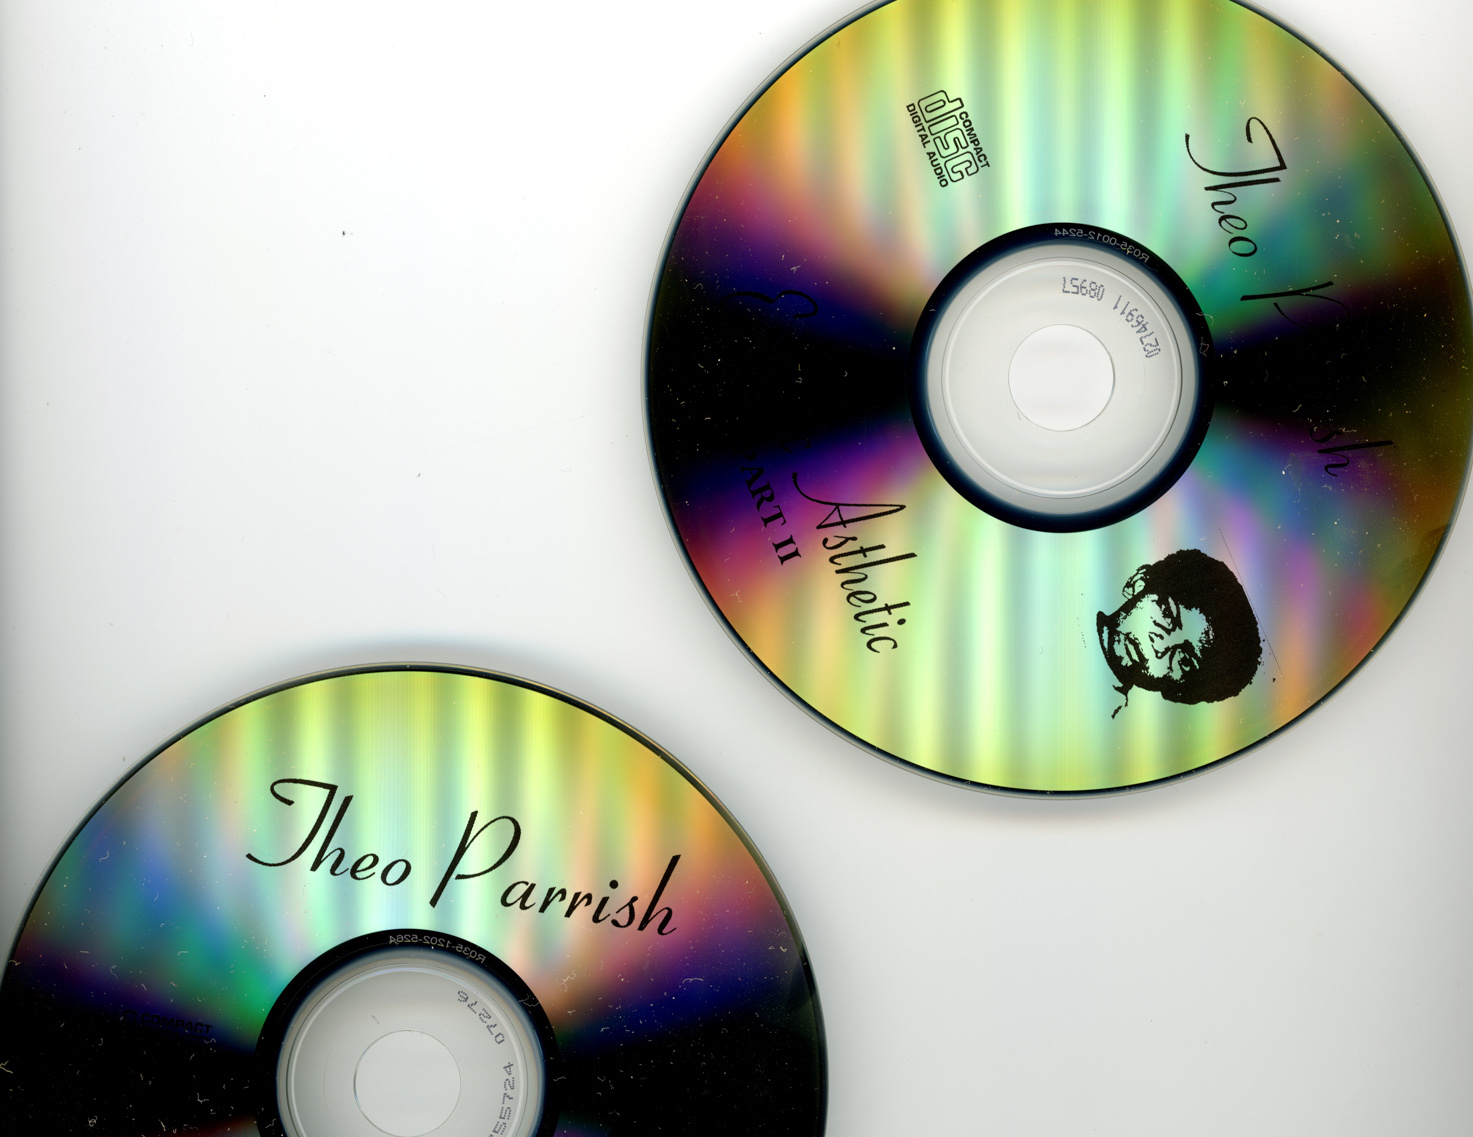 Scanned Theo Parrish CDs. 